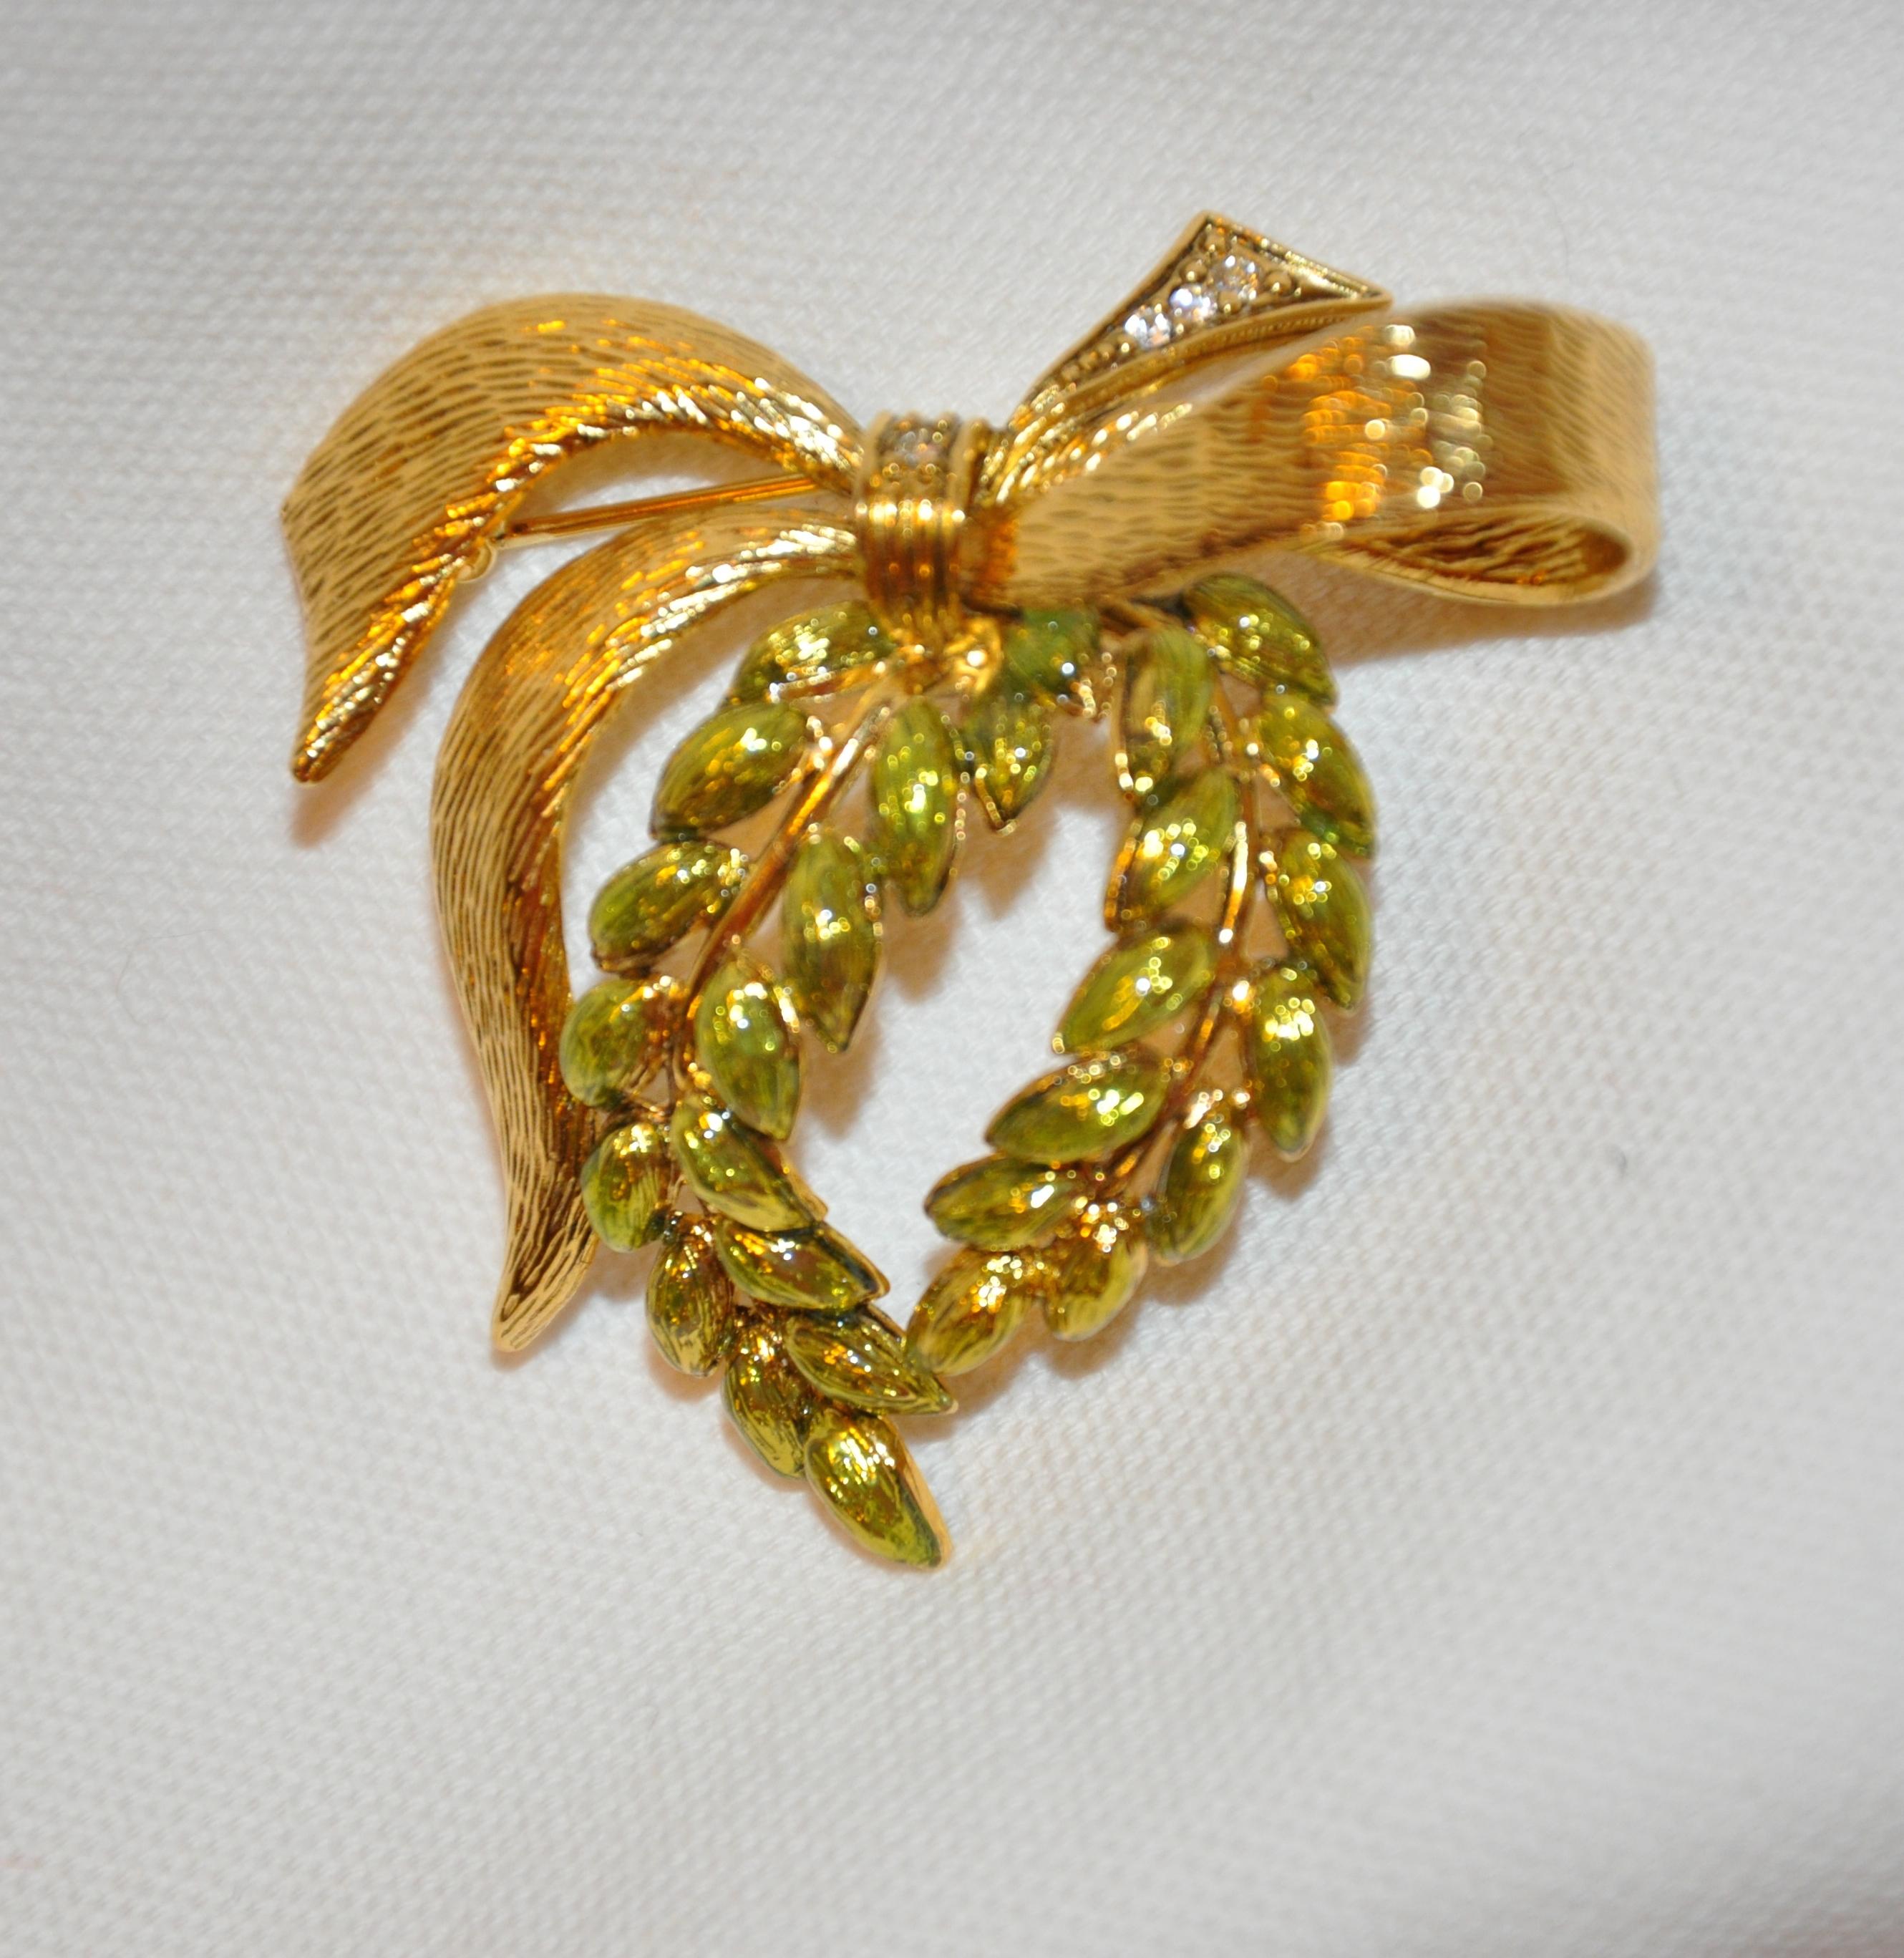        Wonderfully Detailed gilded gold hardware accented with fresh-green enamel 